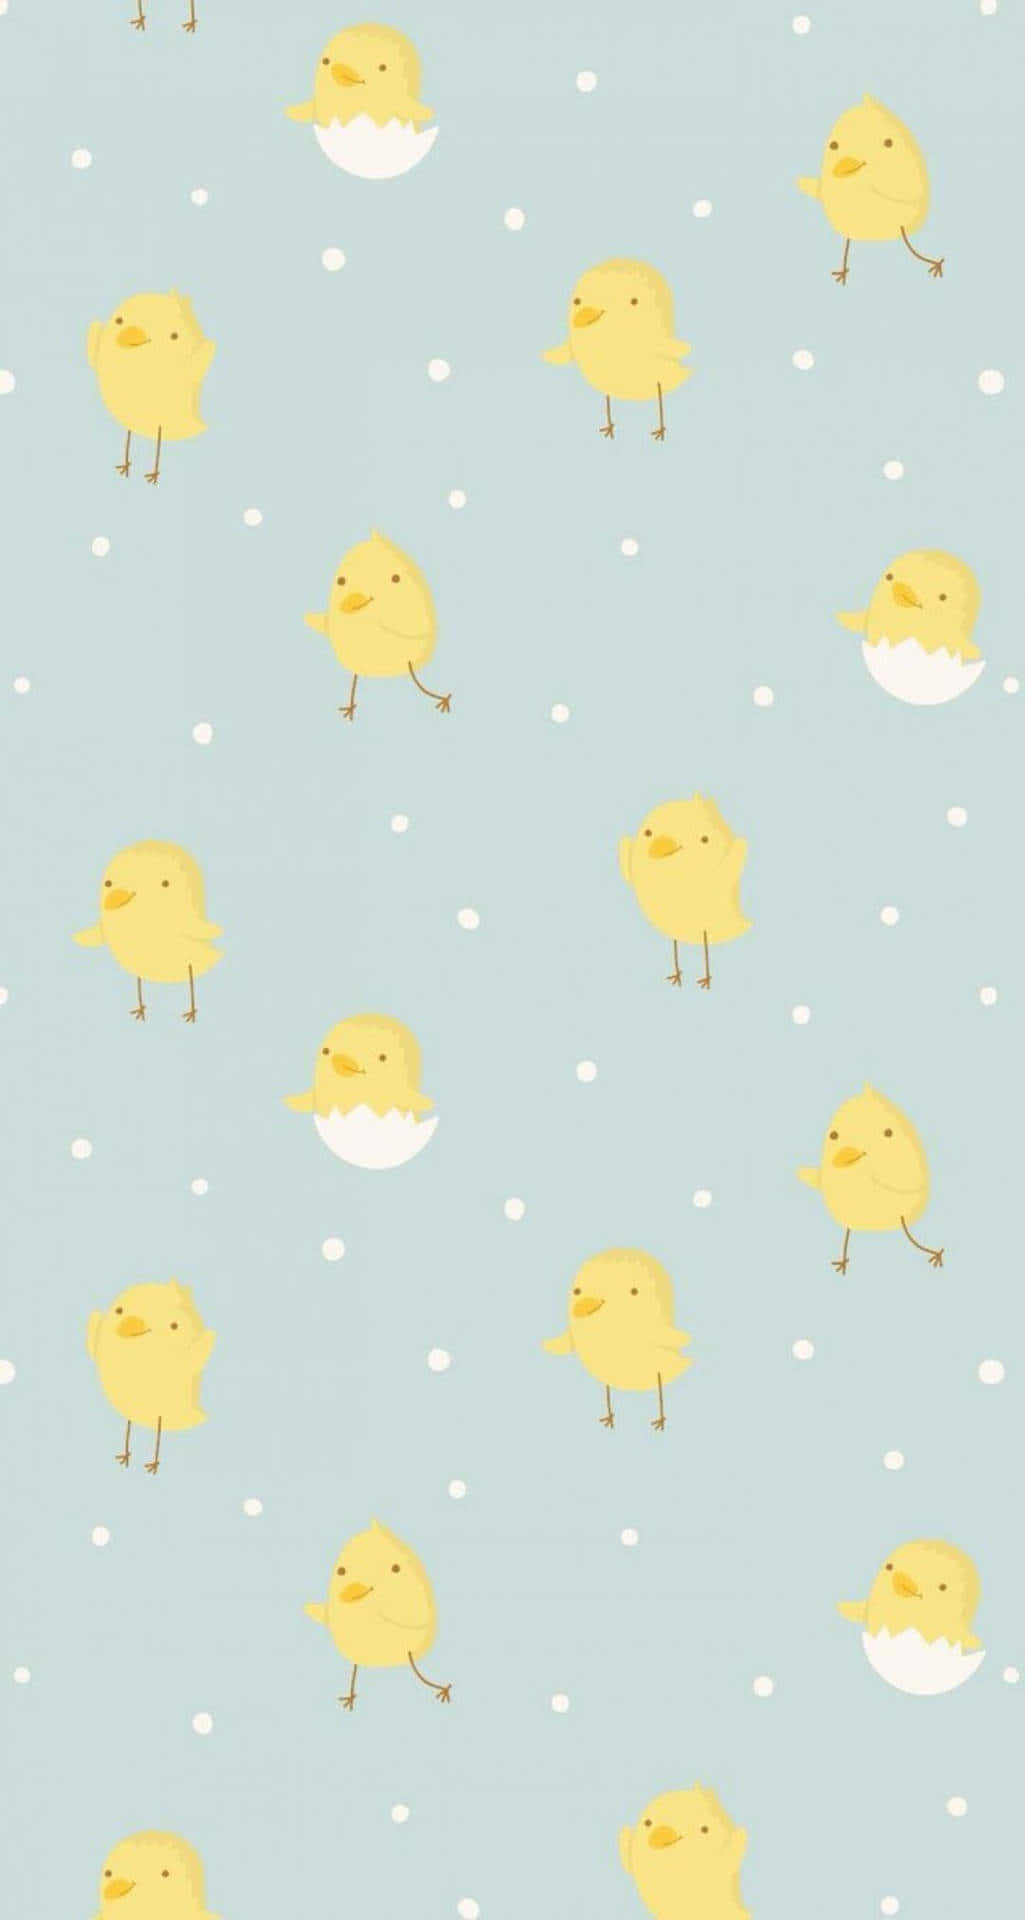 Enjoy the festivities of Easter with a cute new iPhone! Wallpaper